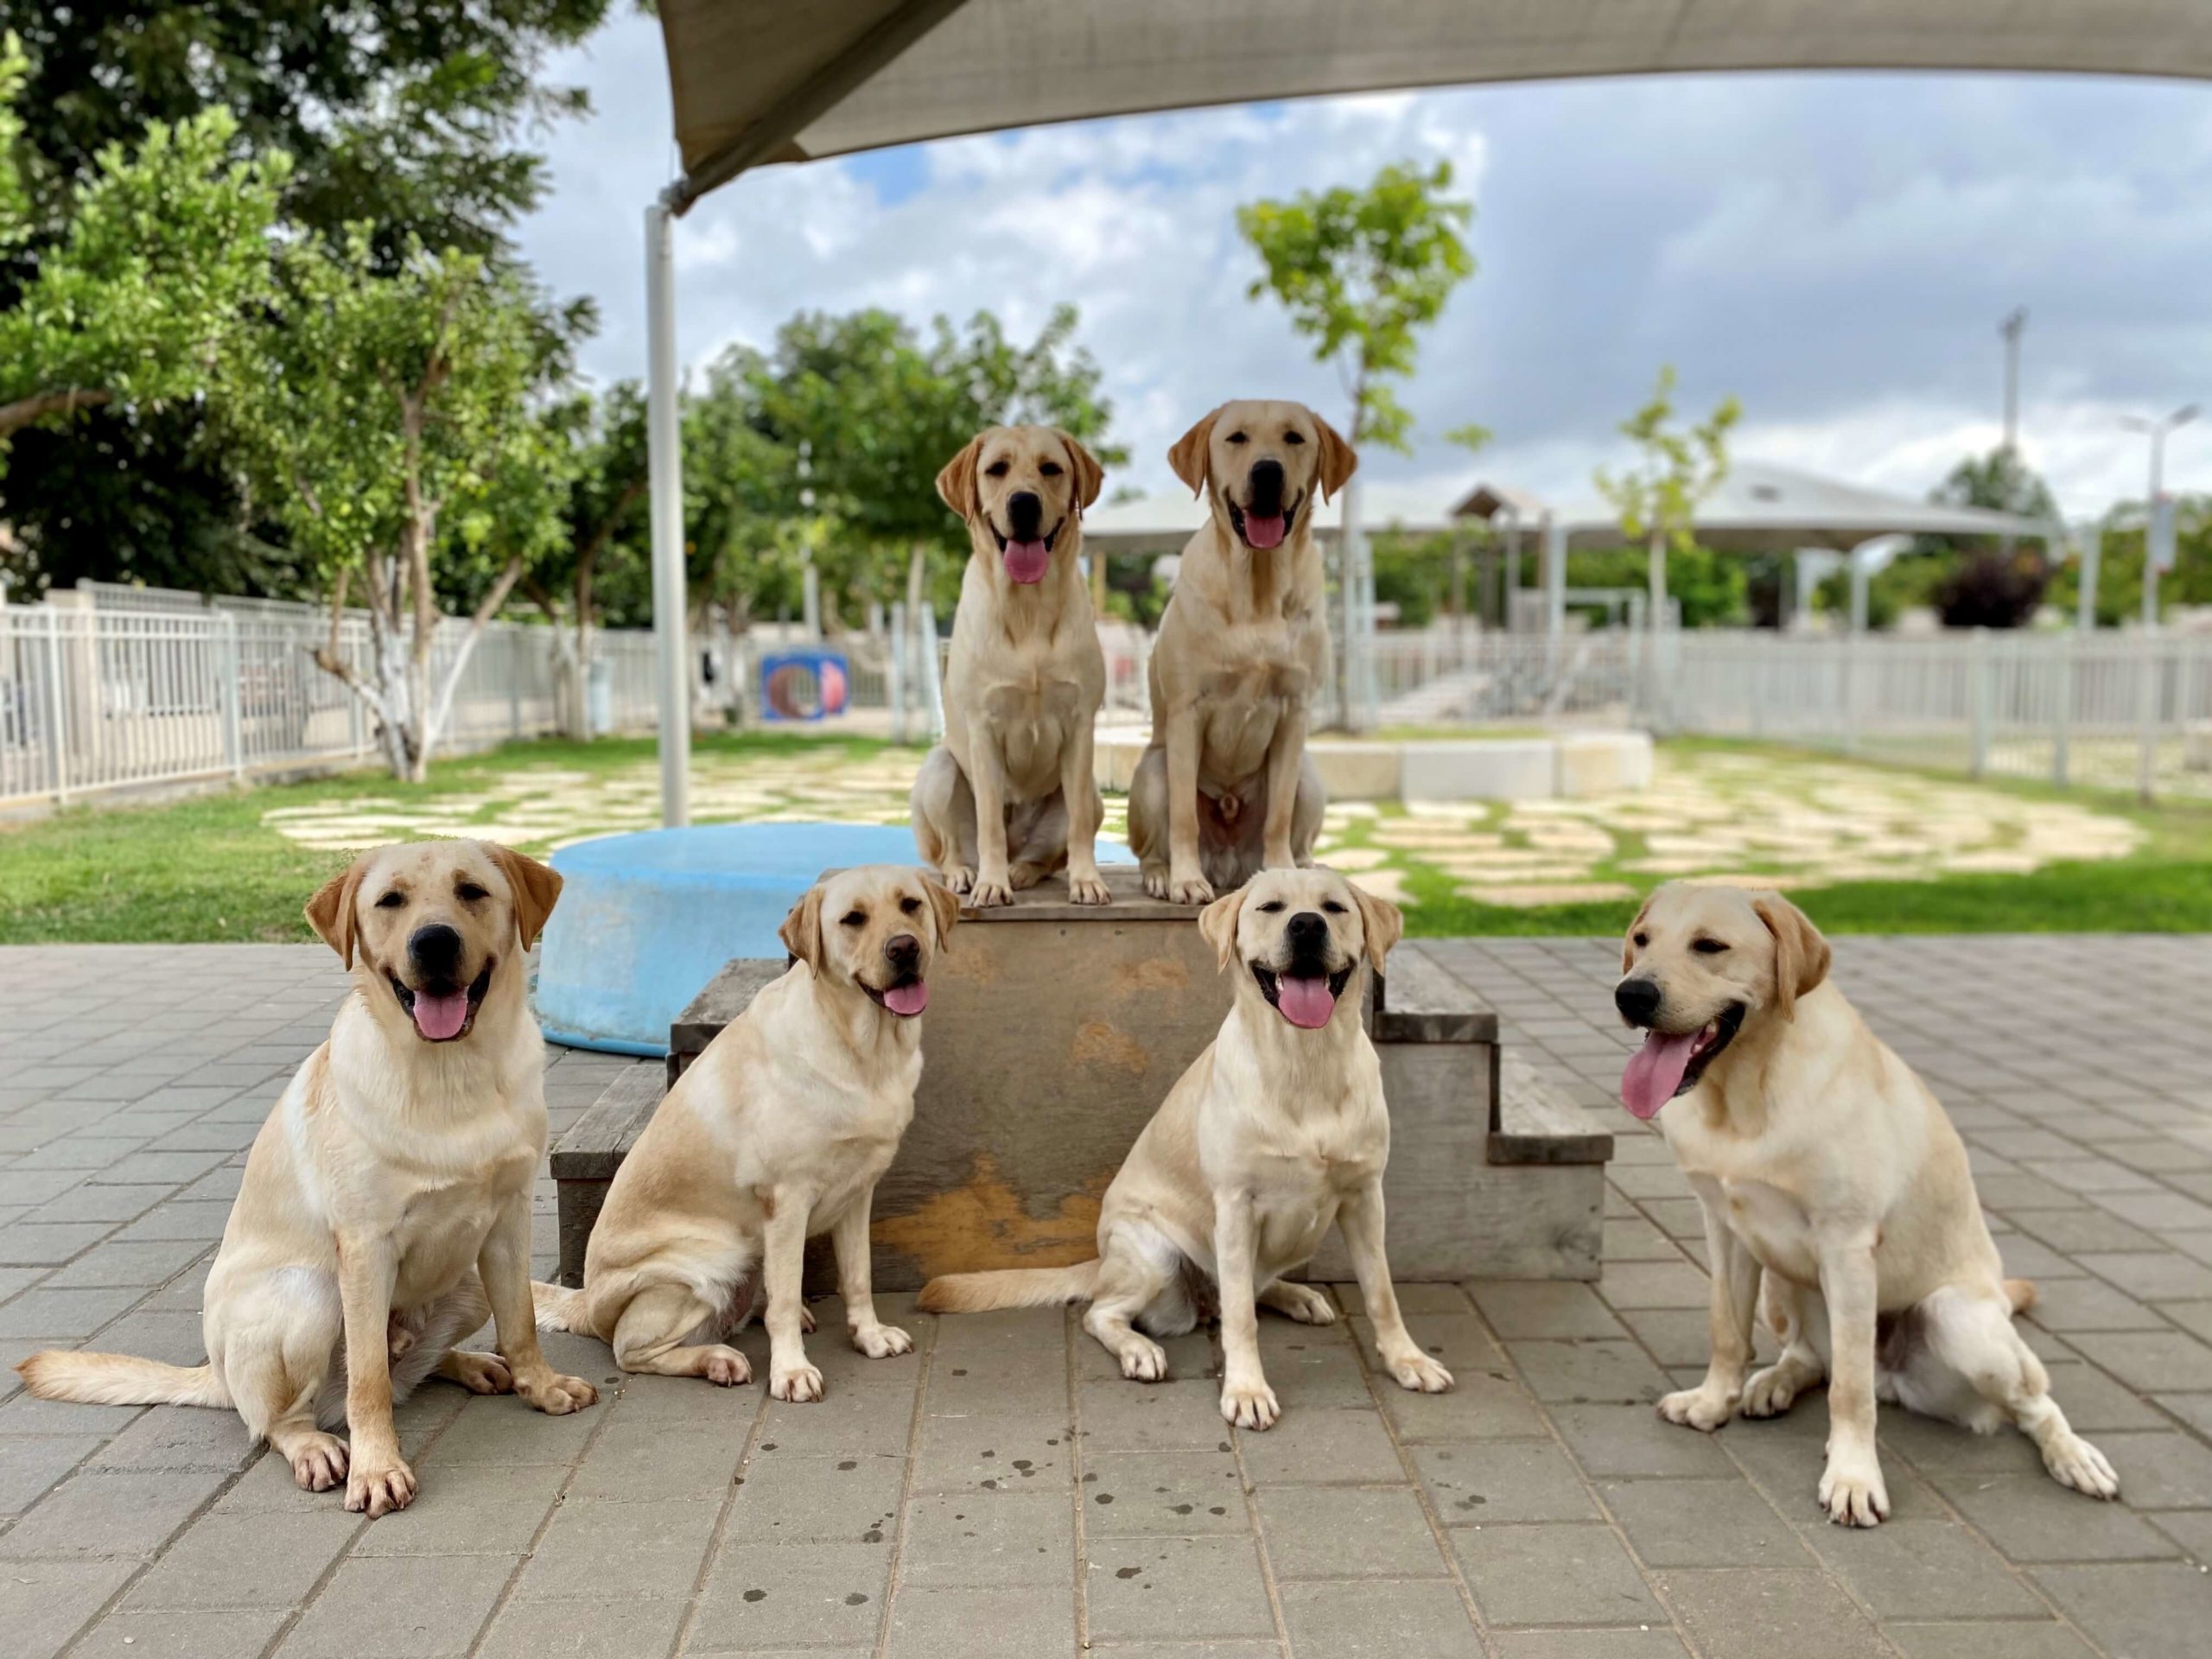 Group of 6 guide dogs in training